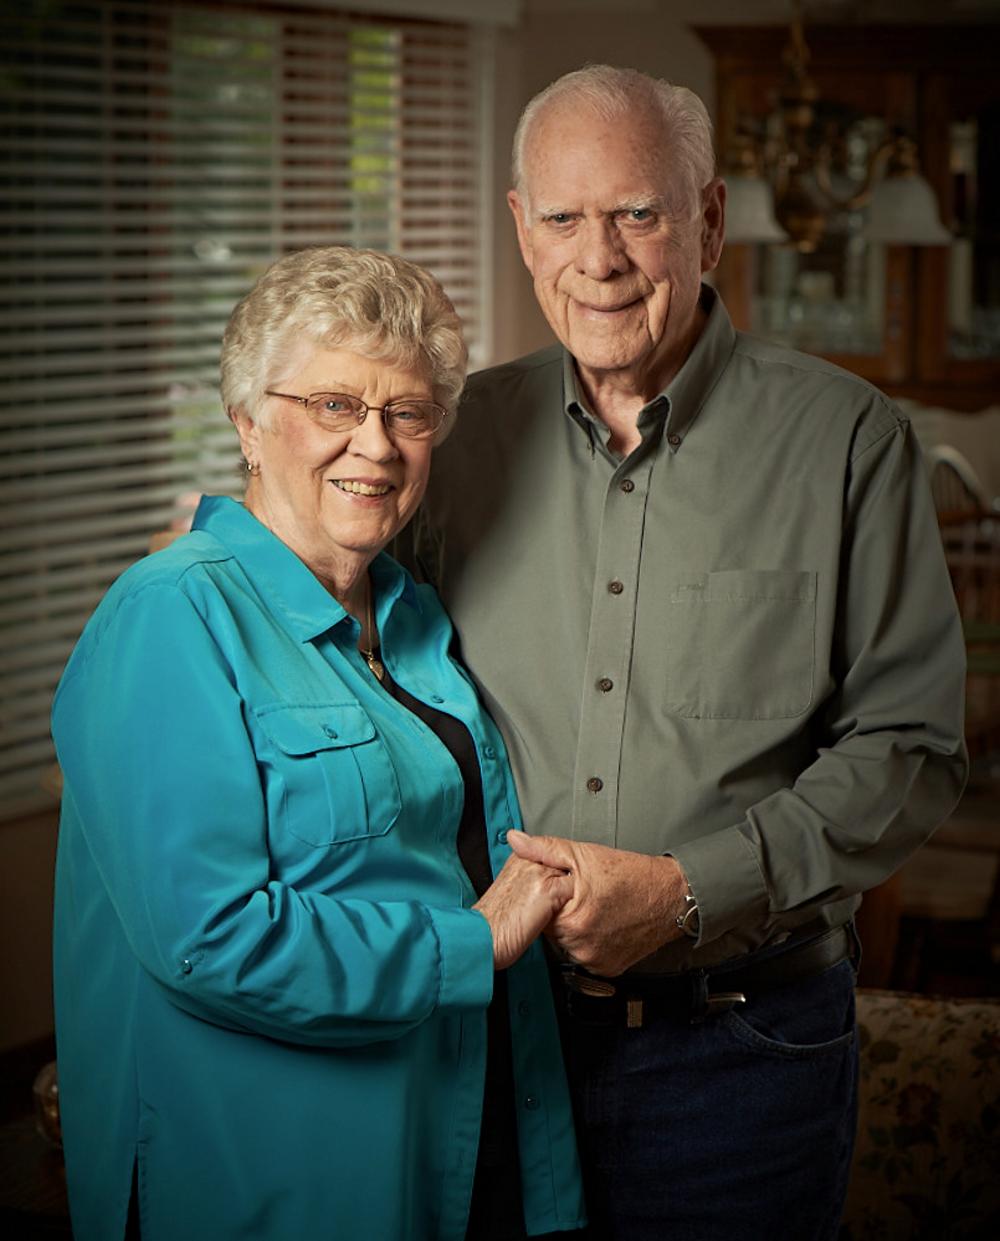 Married for life - Pat and Bob's secrets for a successful marriage